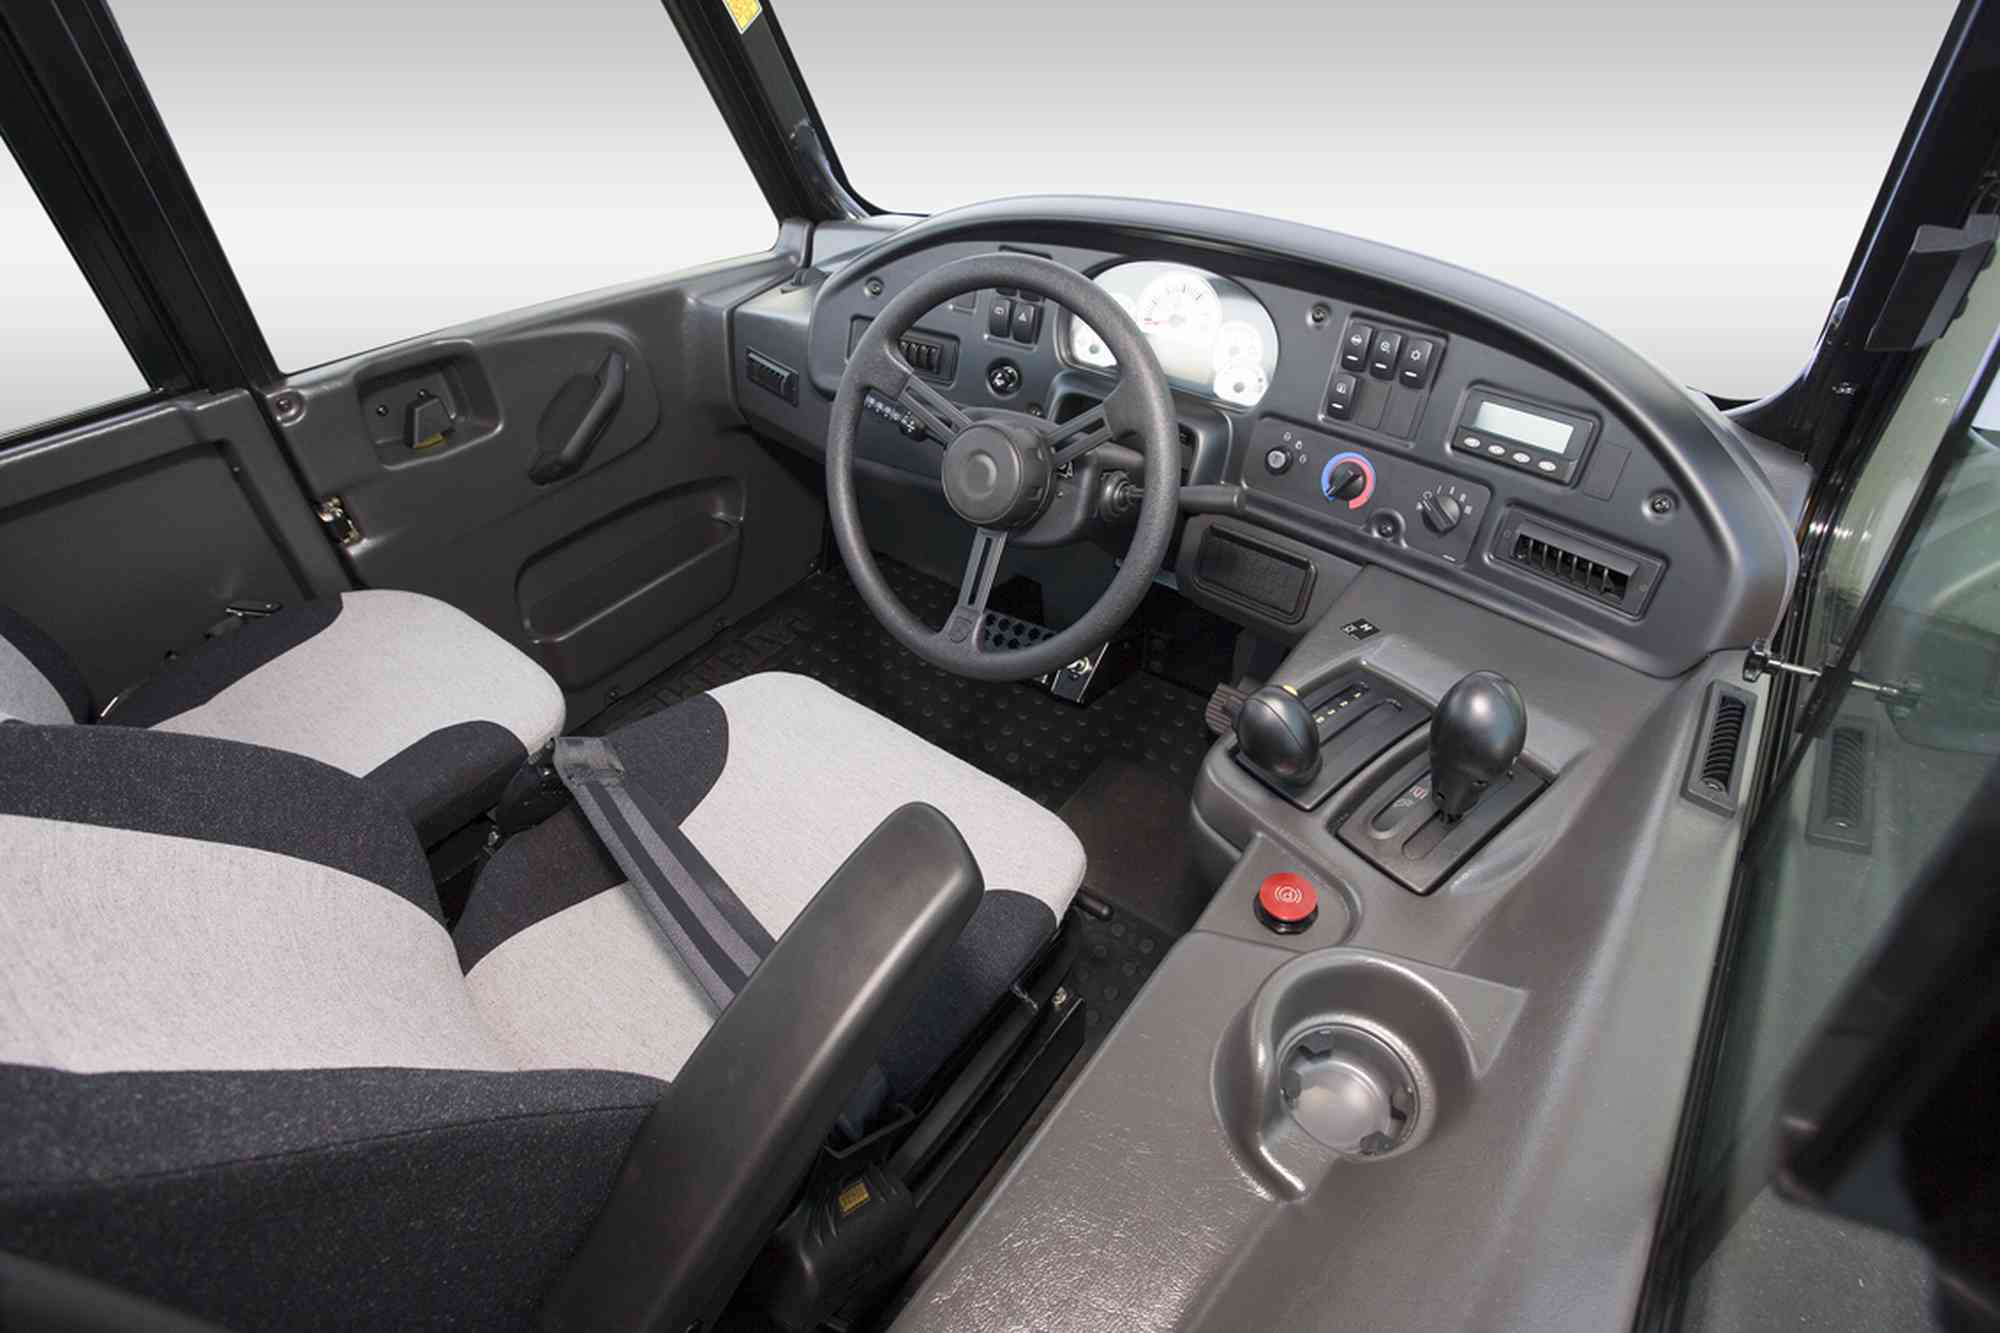 The dash board is part of a complete cab interior trimming.